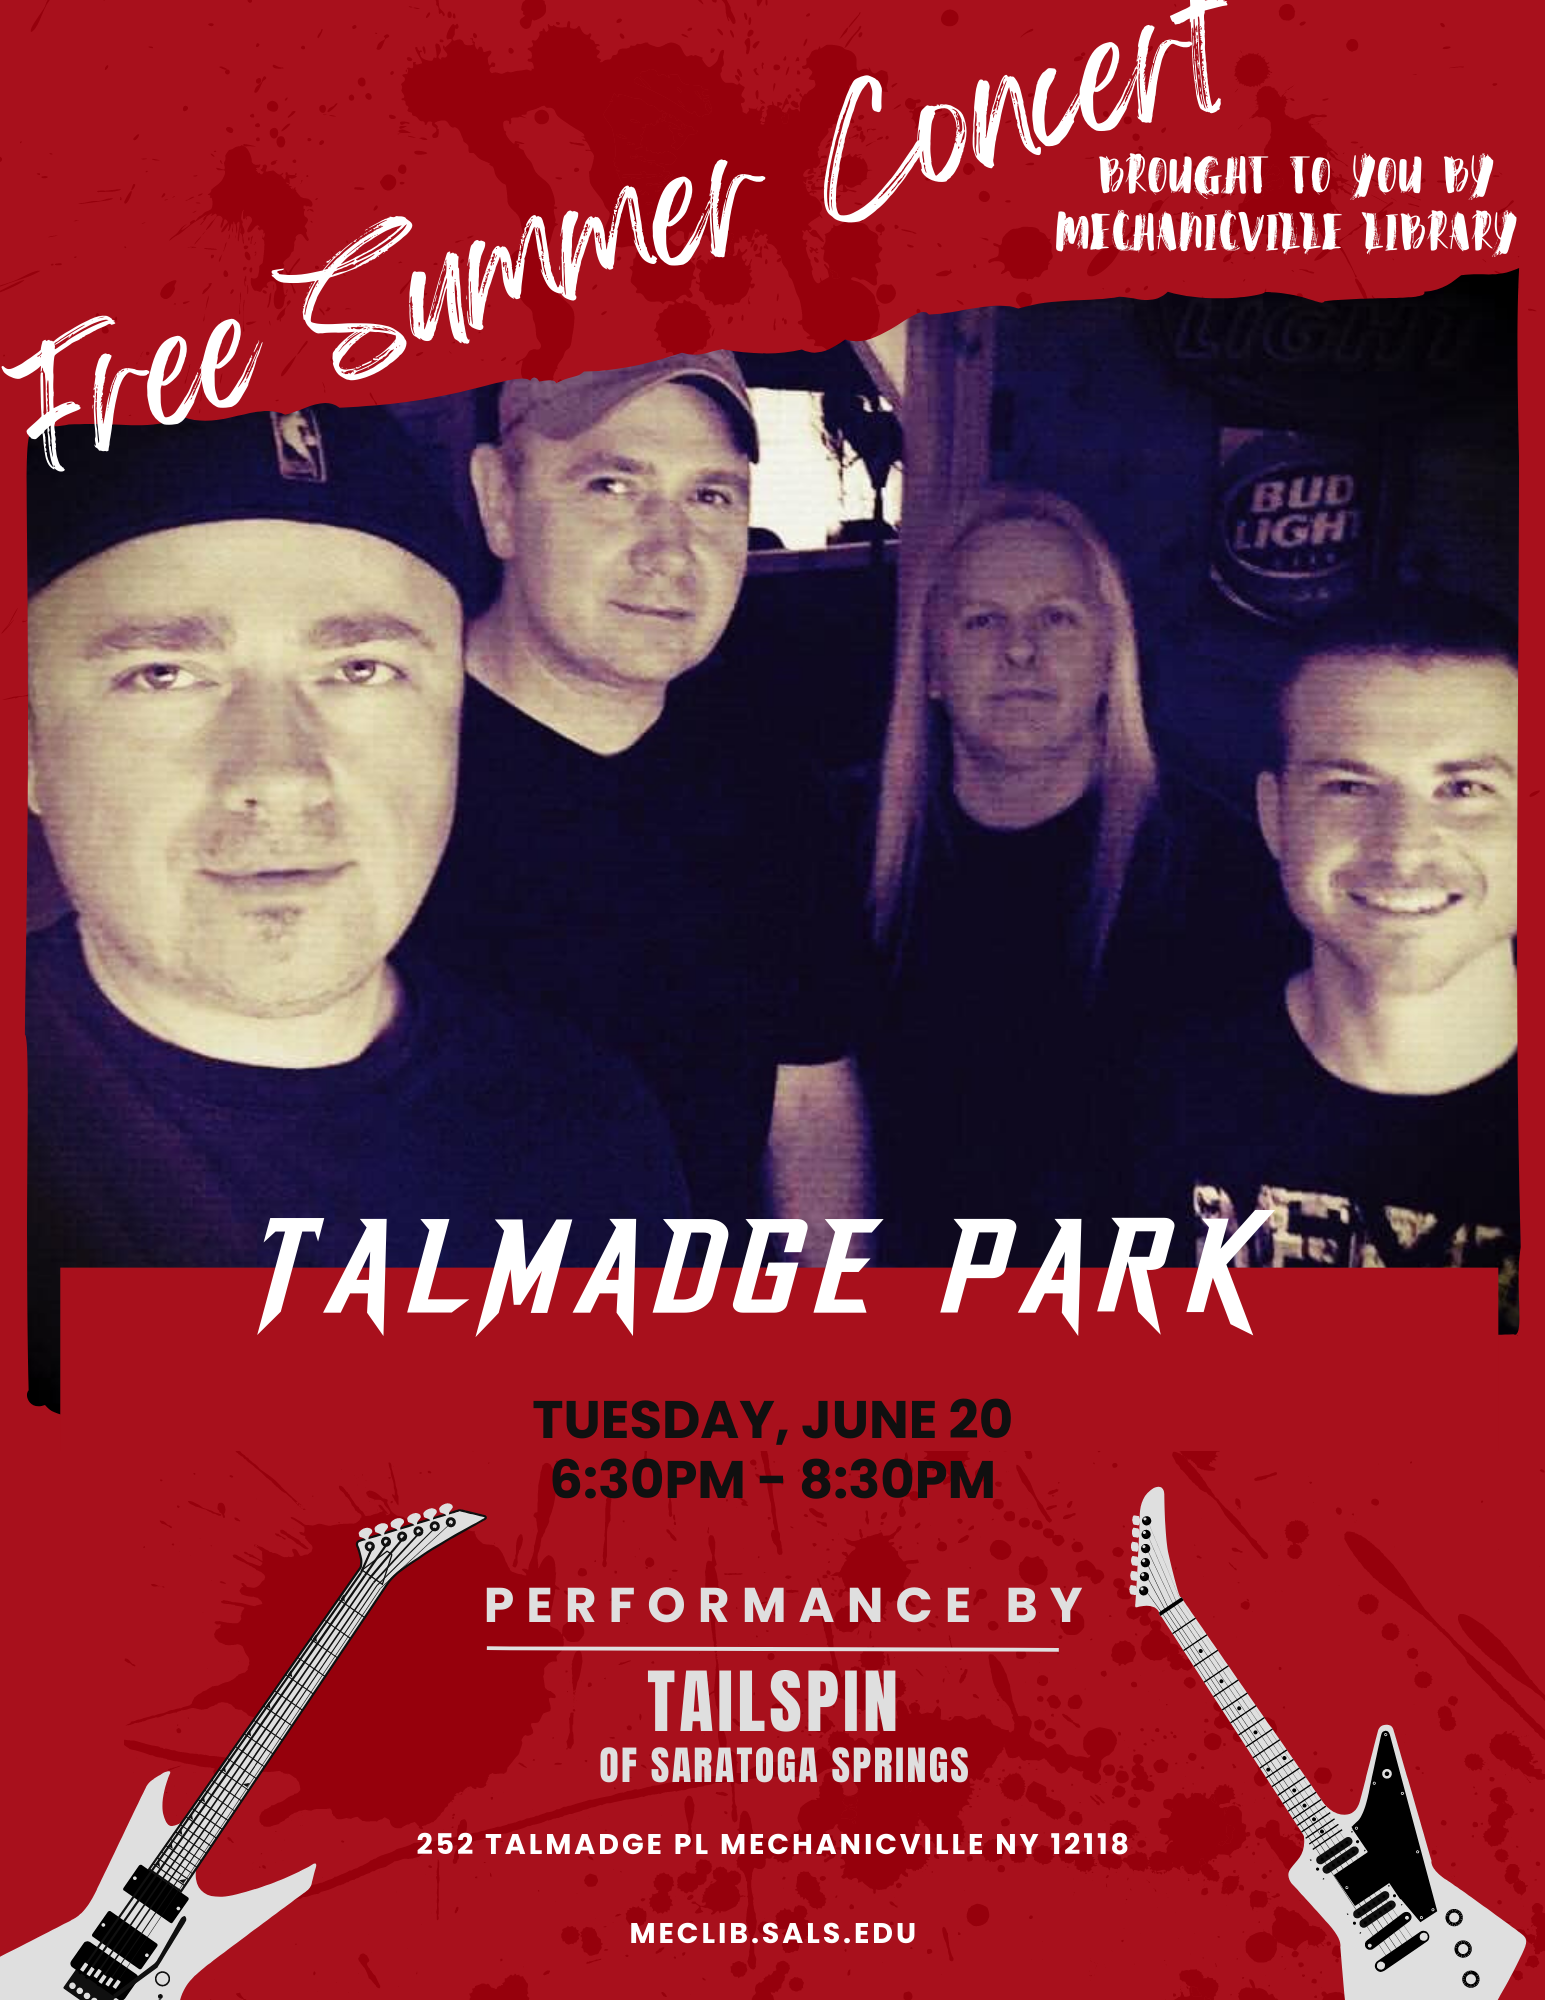 Summer Concerts in Talmadge- Tailspin - Sponsored by Friends of the Mechanicville Library @ Talmadge Park | Mechanicville | New York | United States